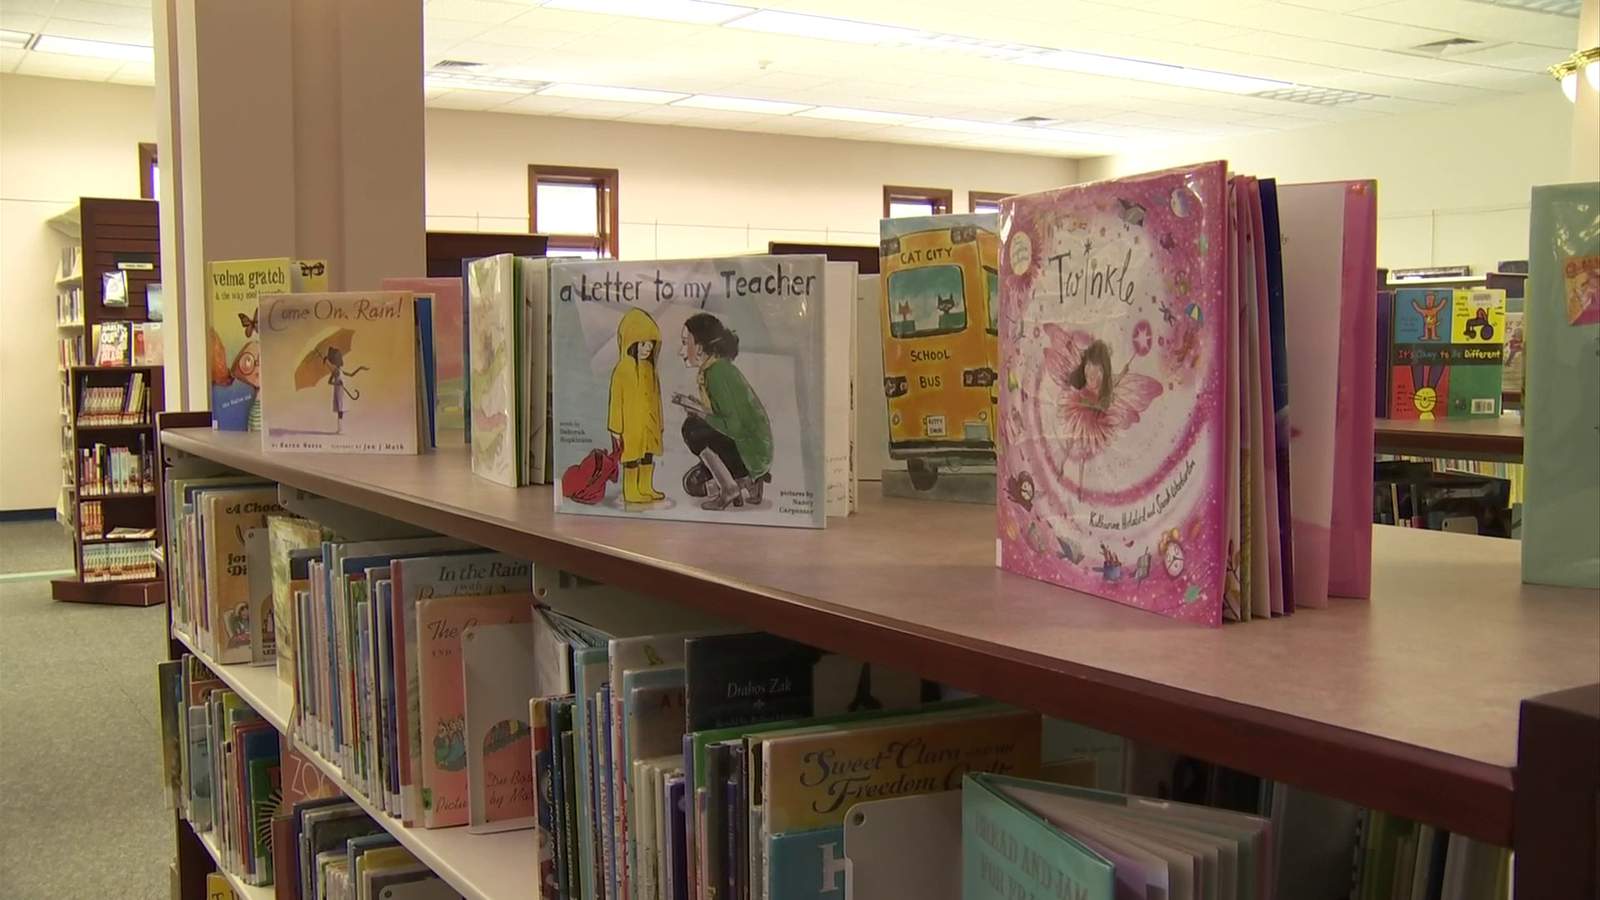 Regions libraries taking different approaches when it comes to reopening